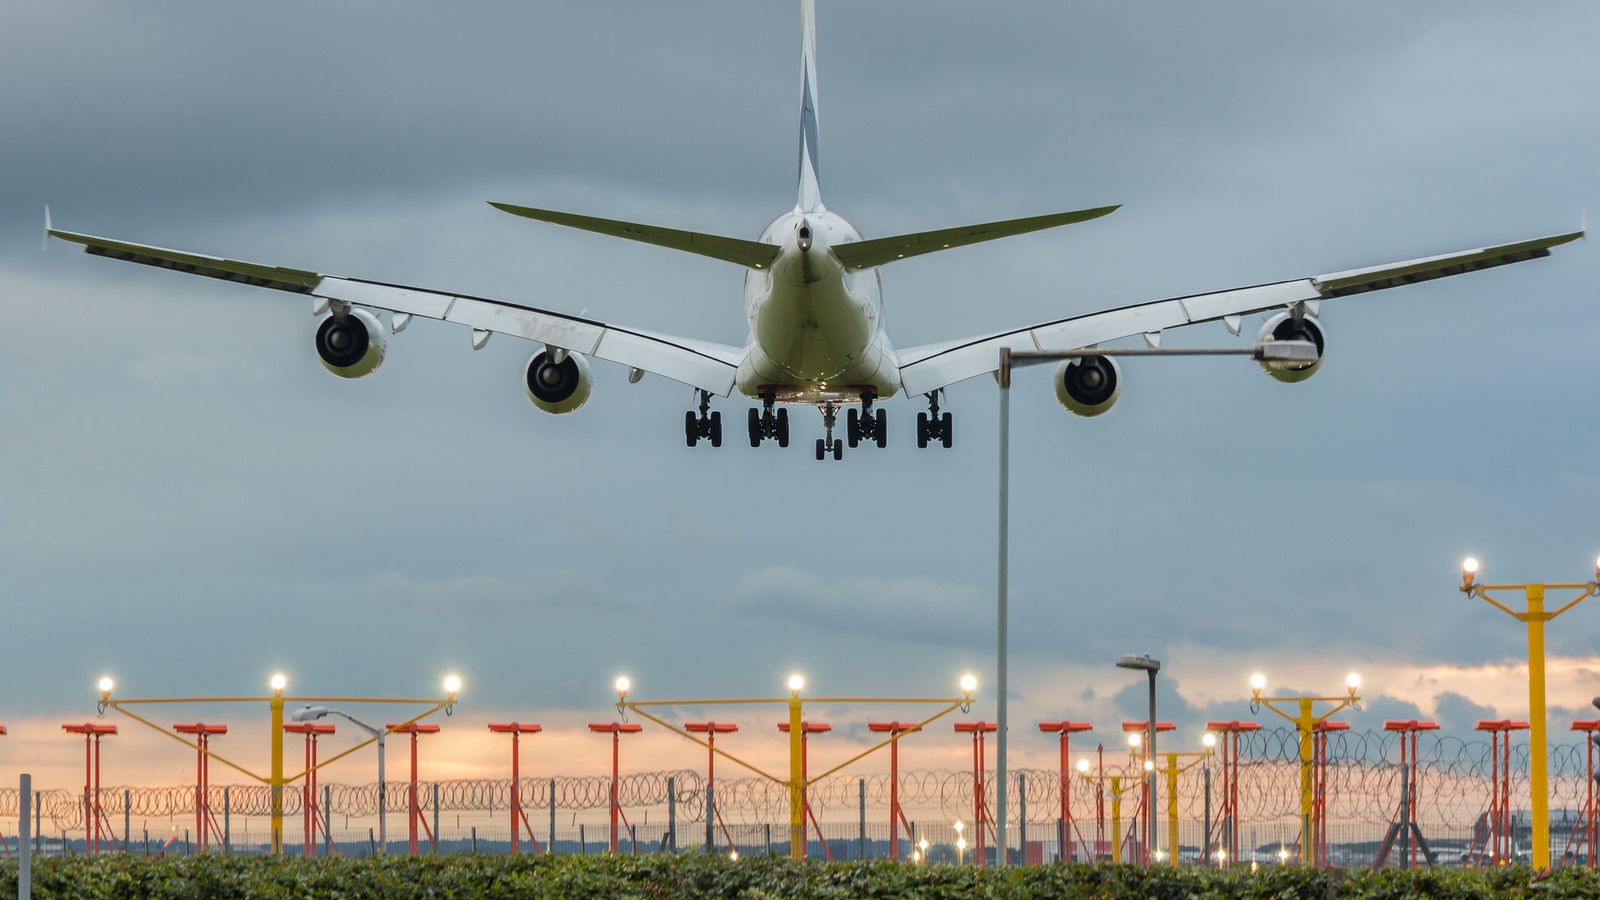 Heathrow beginning to recover from travel chaos, airport boss says